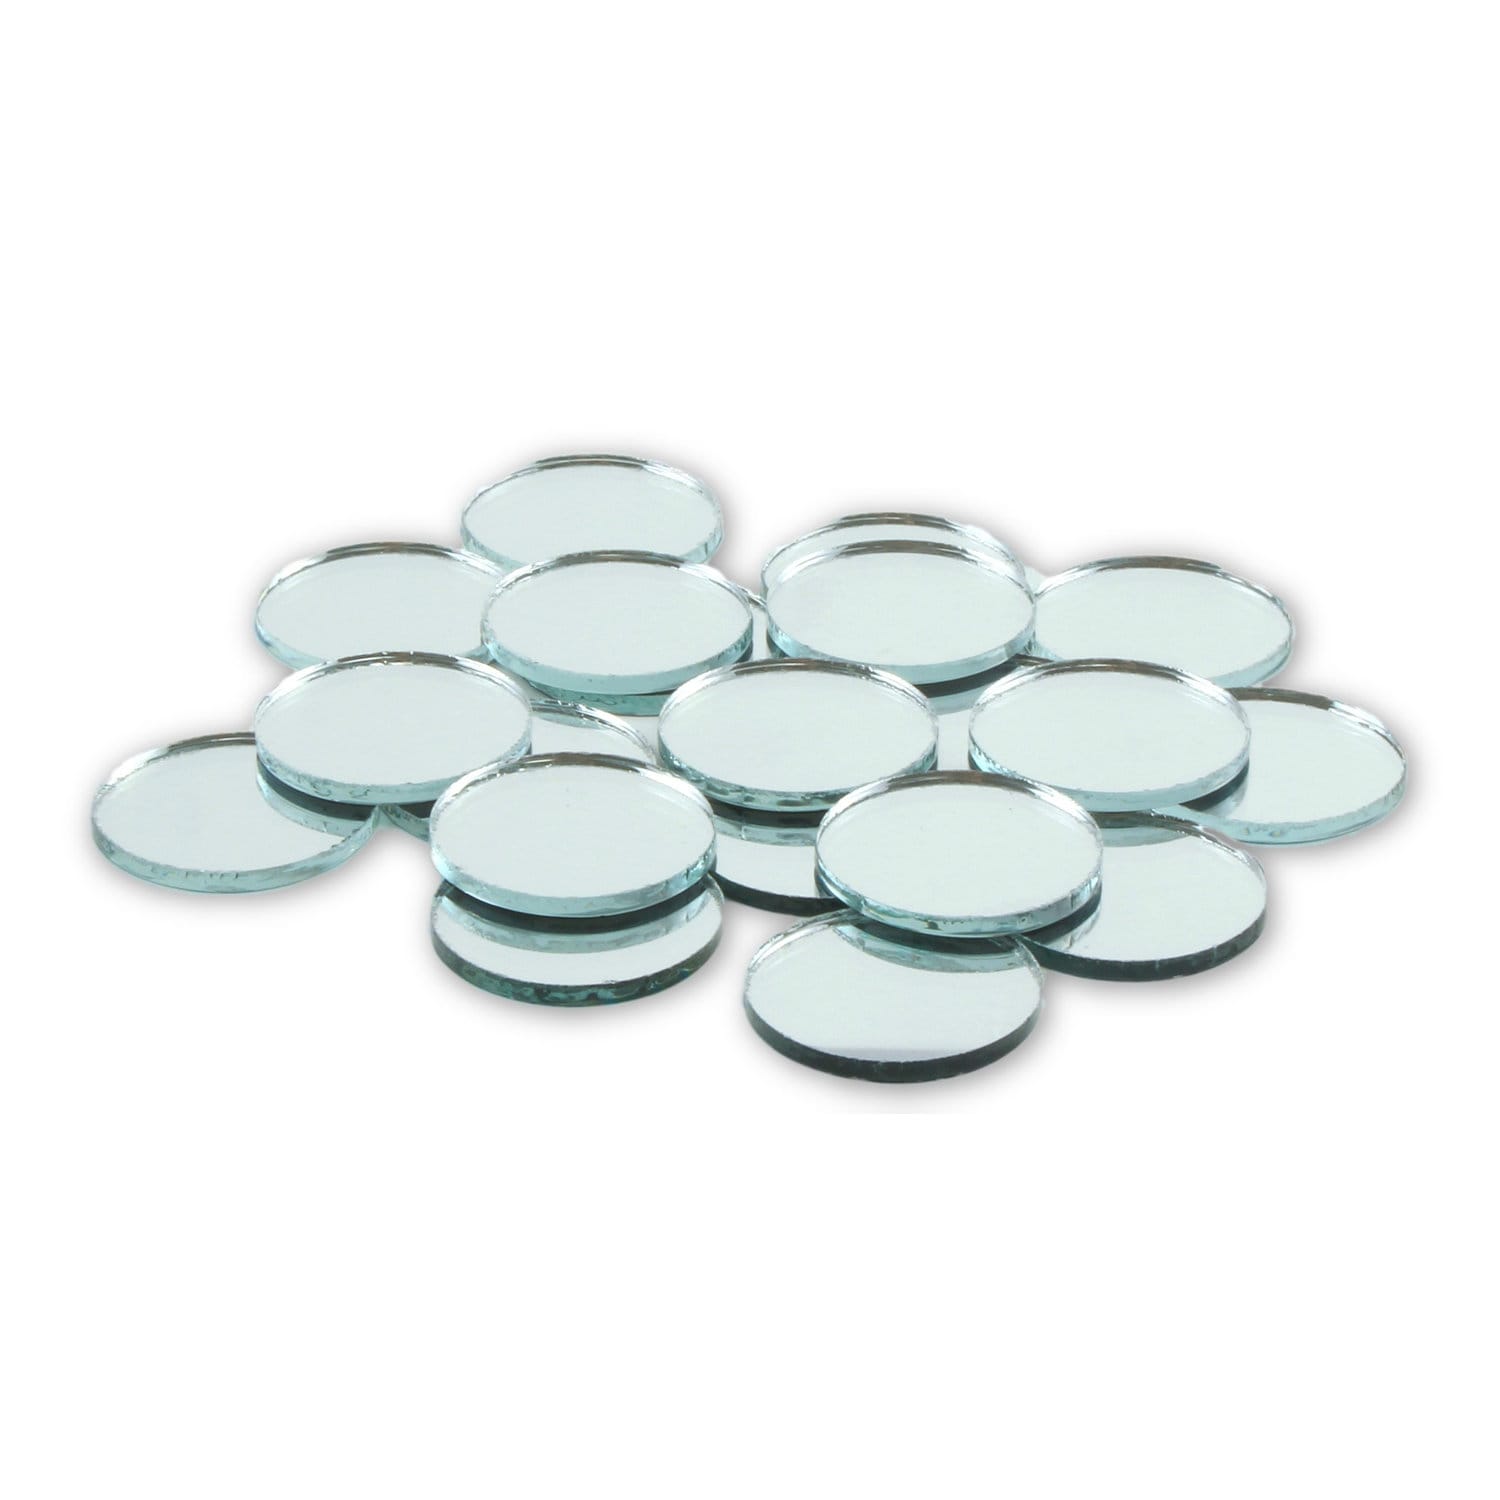 4 inch Glass Craft Small Round Mirror 24 Pieces Mosaic Mirror Tiles